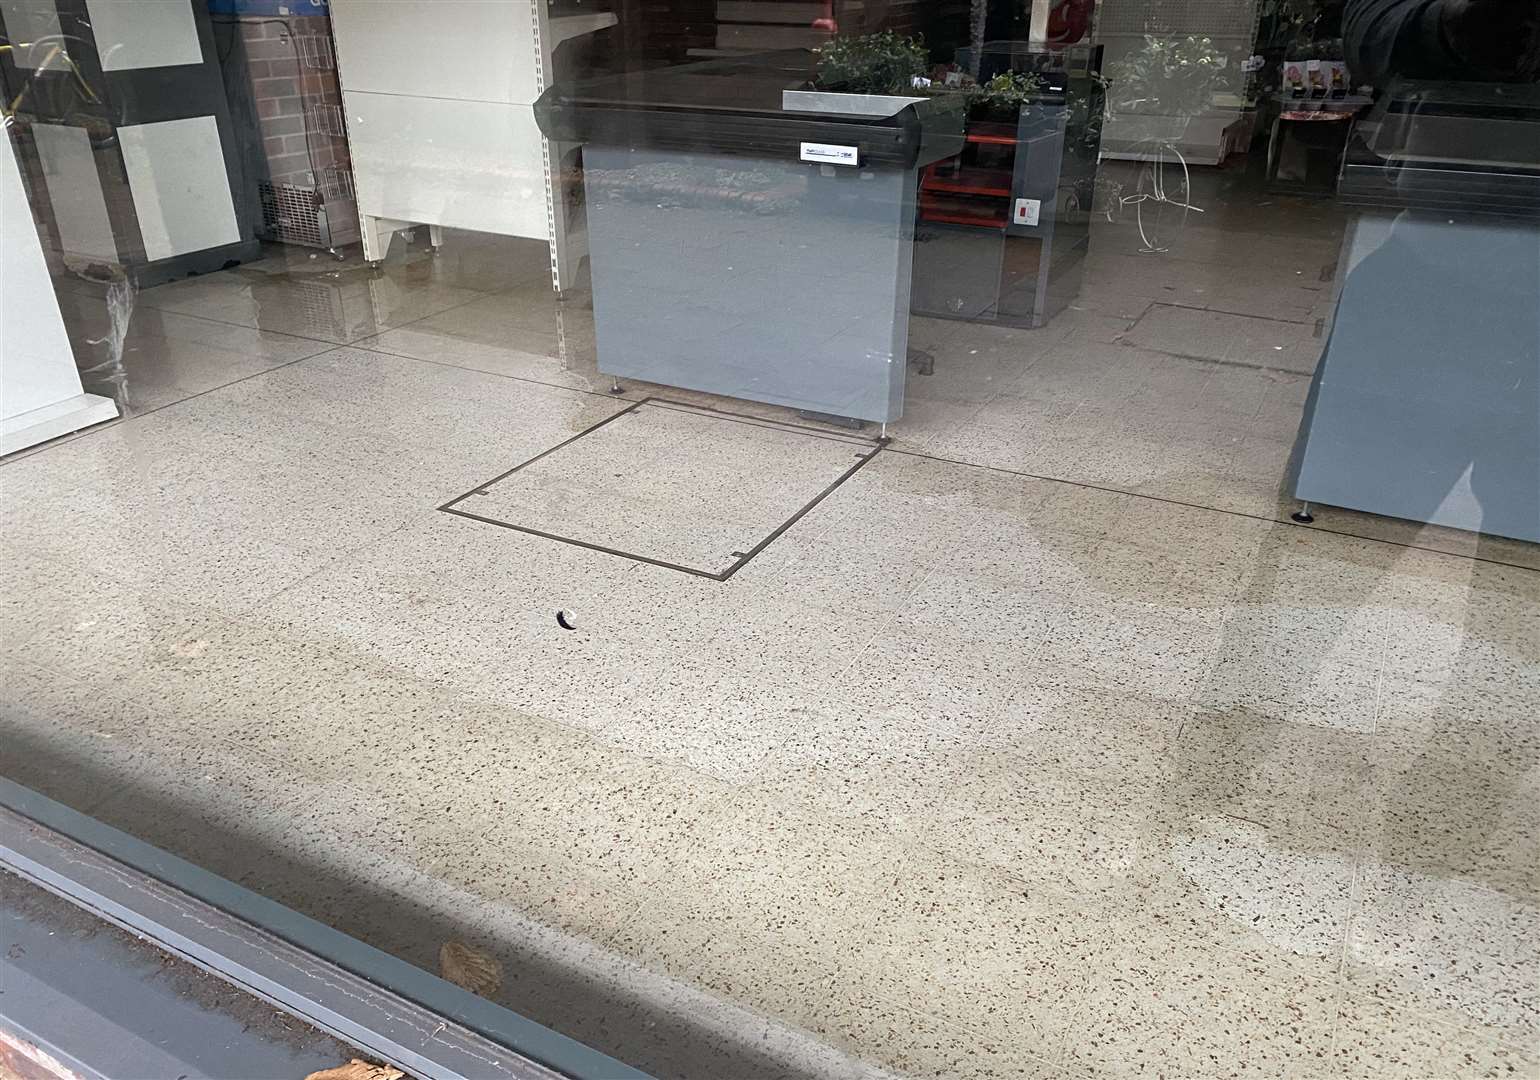 The shop floor in the Wilko covered in a puddle of water